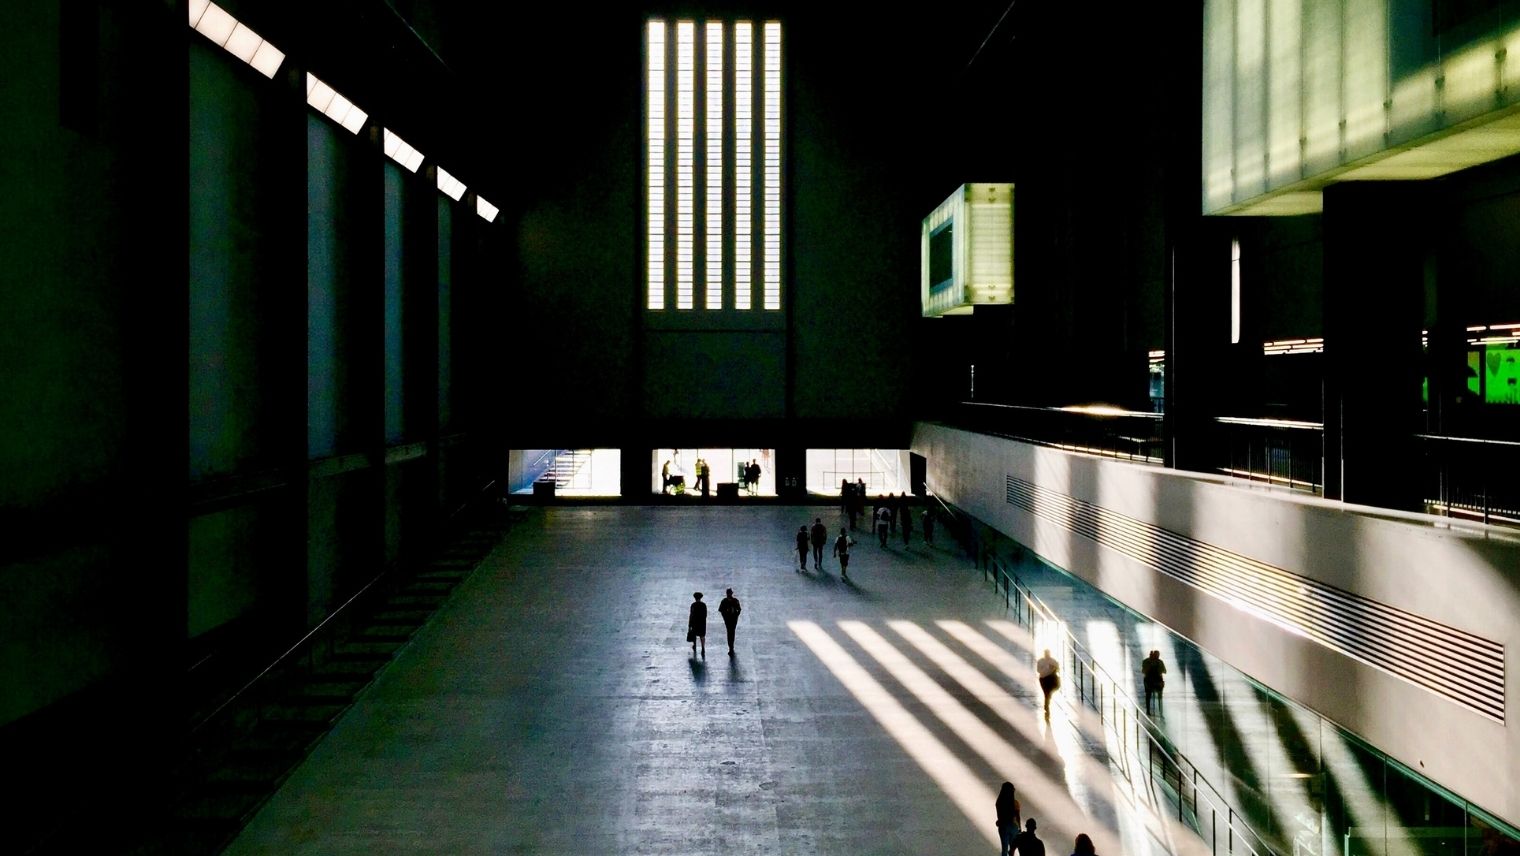 Interior of the Turbine Hall at the Tate Modern